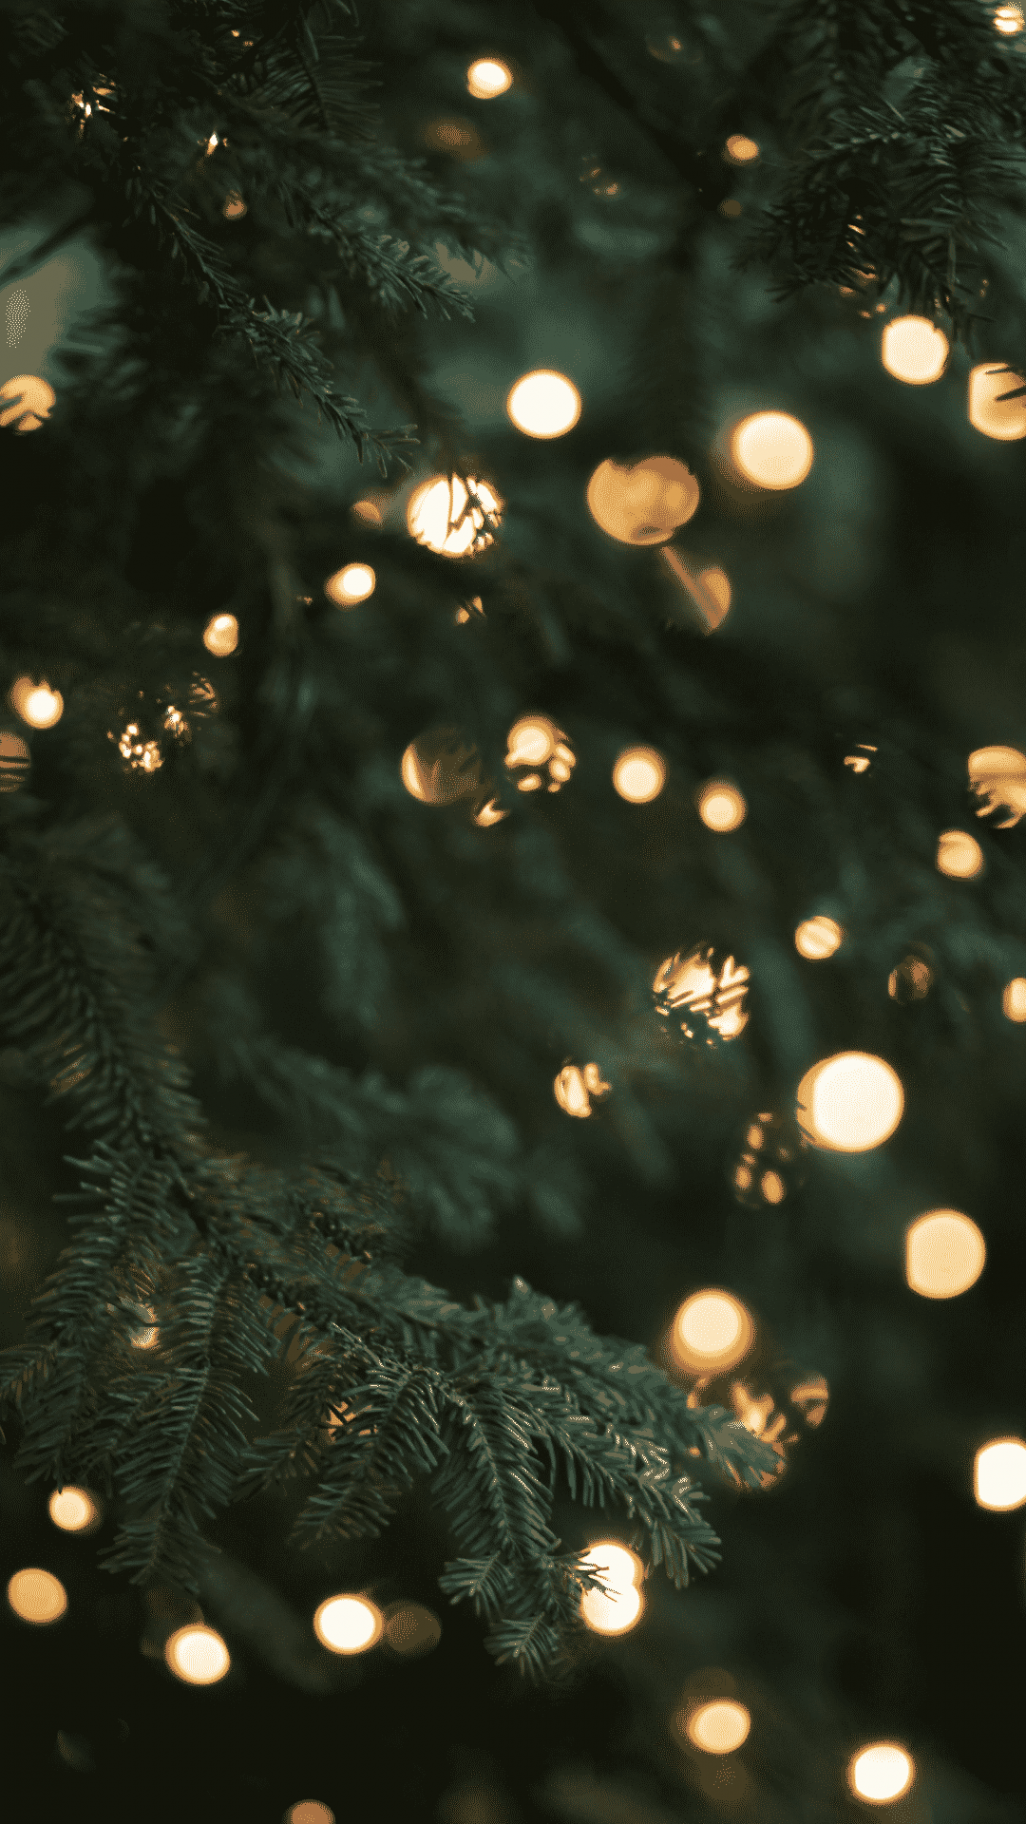 + FREE Aesthetic Christmas Wallpapers For A Festive Phone